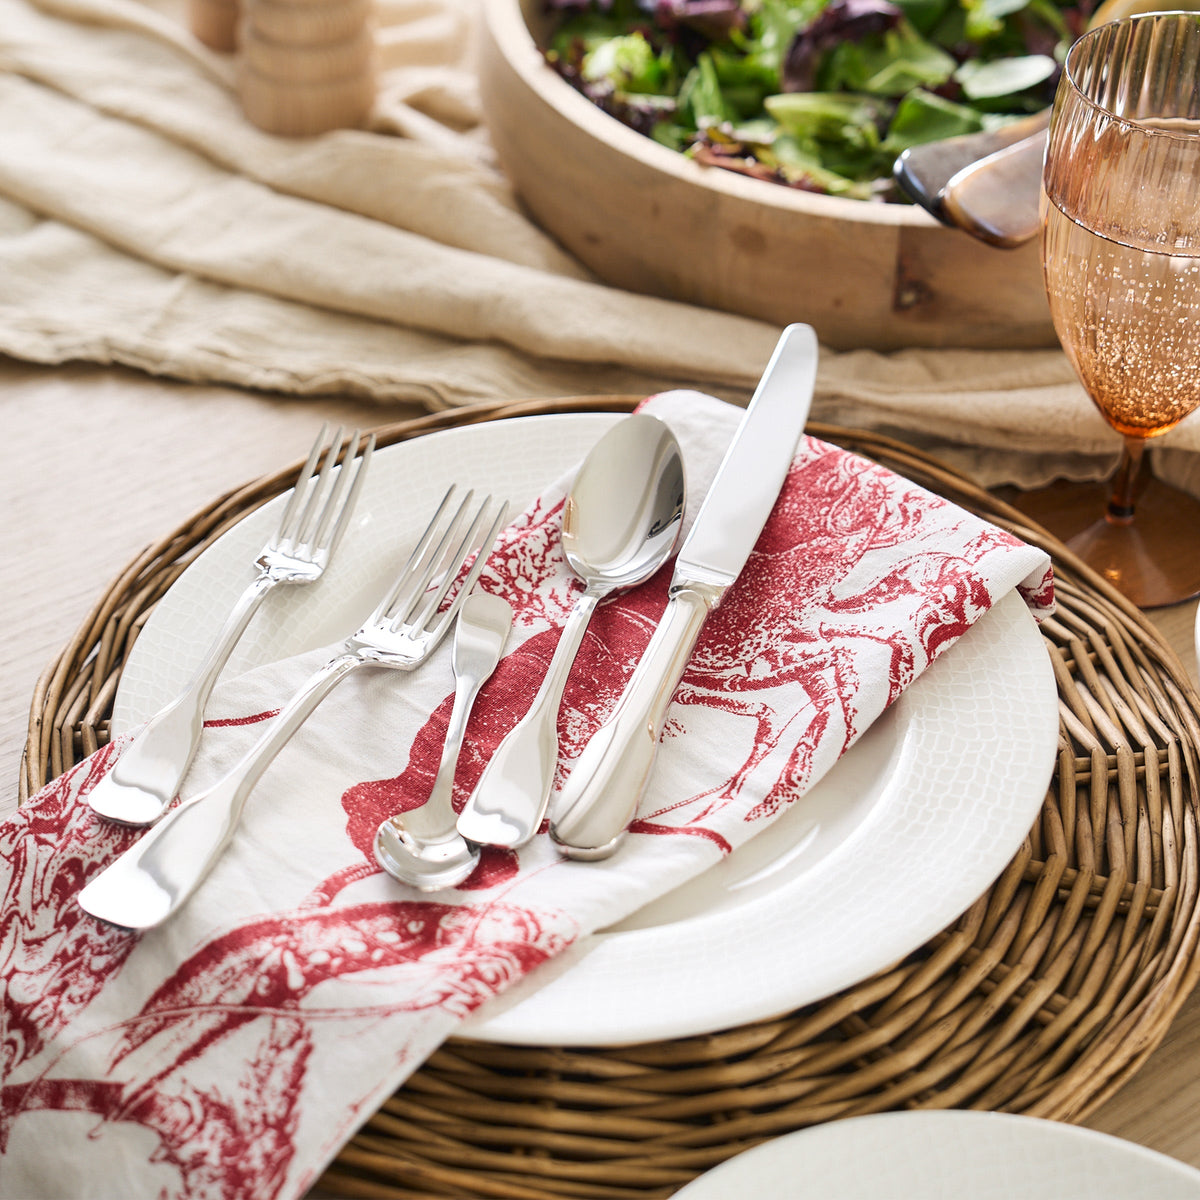 A contemporary design Viol 5-Piece Place Setting napkin in red and white by Degrenne.